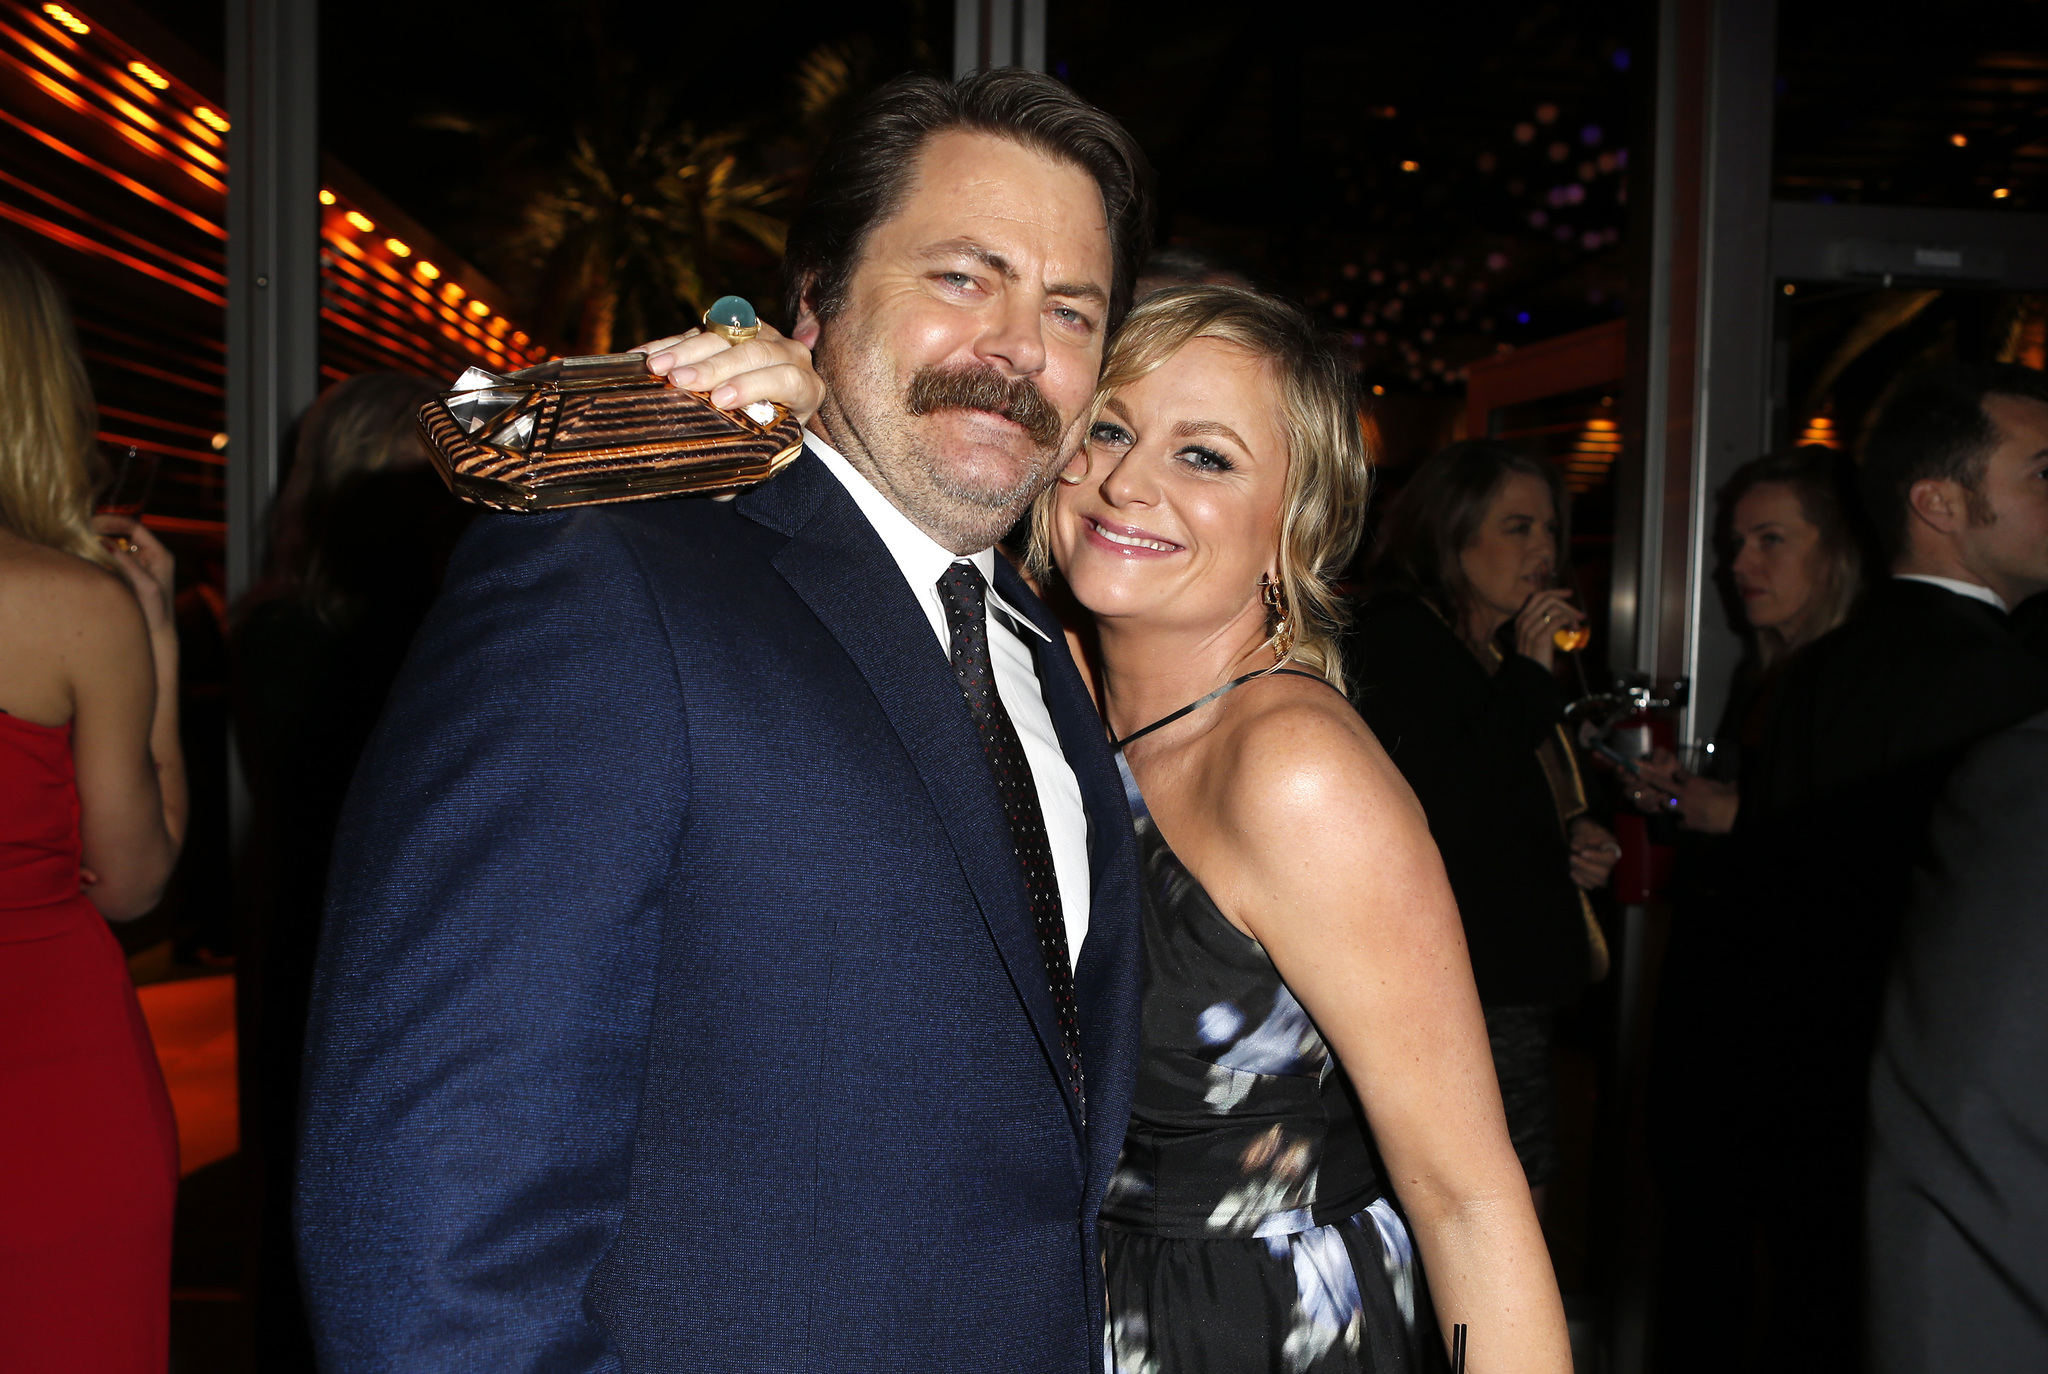 Nick Offerman and Amy Poehler